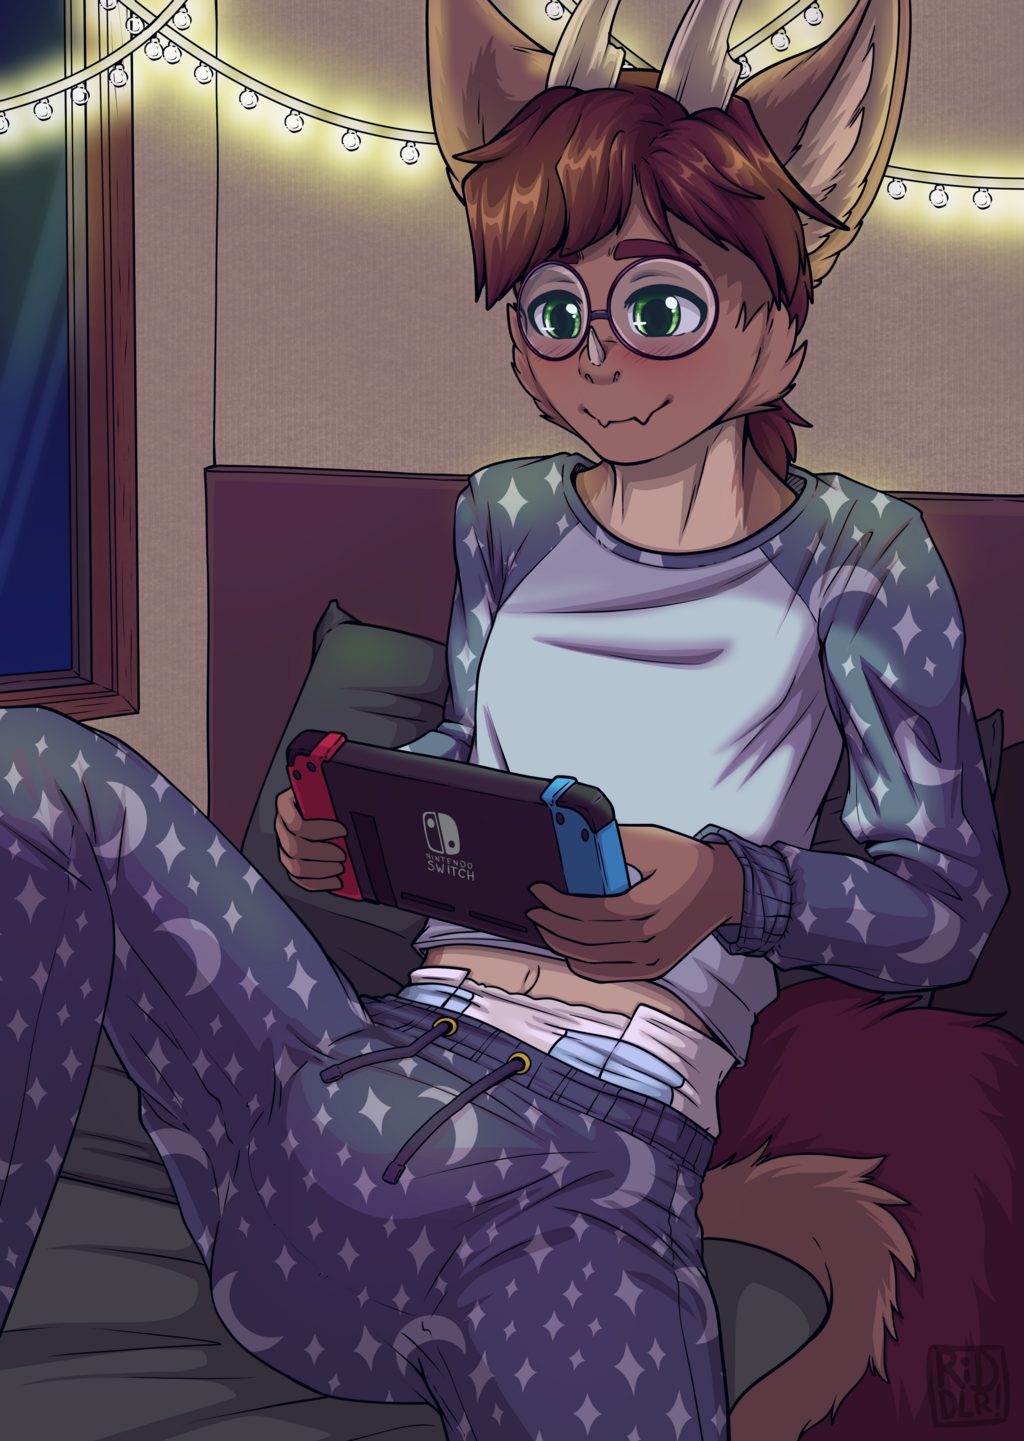 Most recent image: Bedtime Gaming